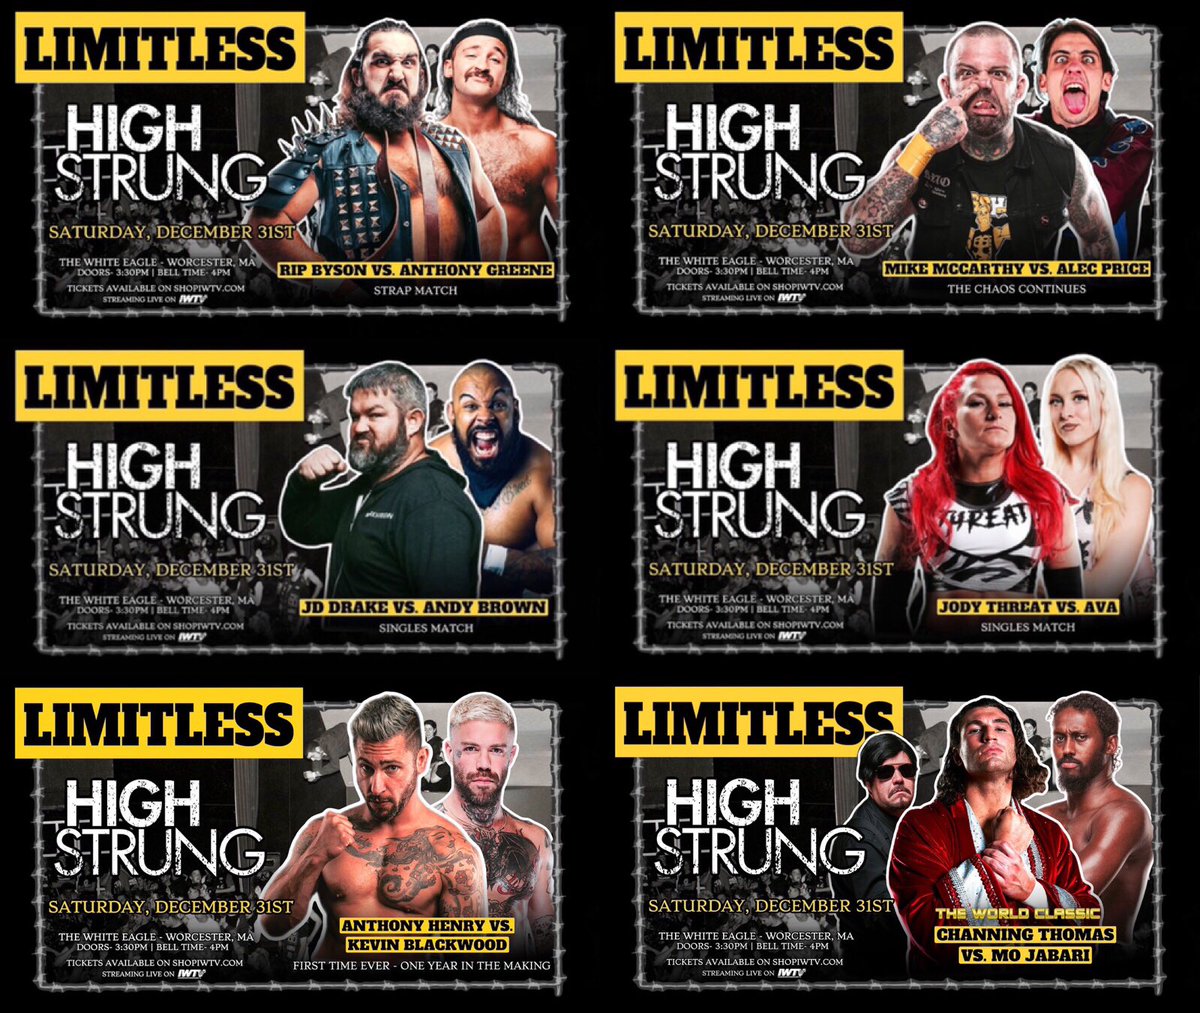 ⭐️ Sponsorship Opportunity ⭐️ Would you like to support Limitless while promoting your podcast or business? All six announced matches for our Worcester, MA return at Wrestival on 12/31 are available to sponsor! Email LimitlessWrestling@yahoo.com or DM for more info!